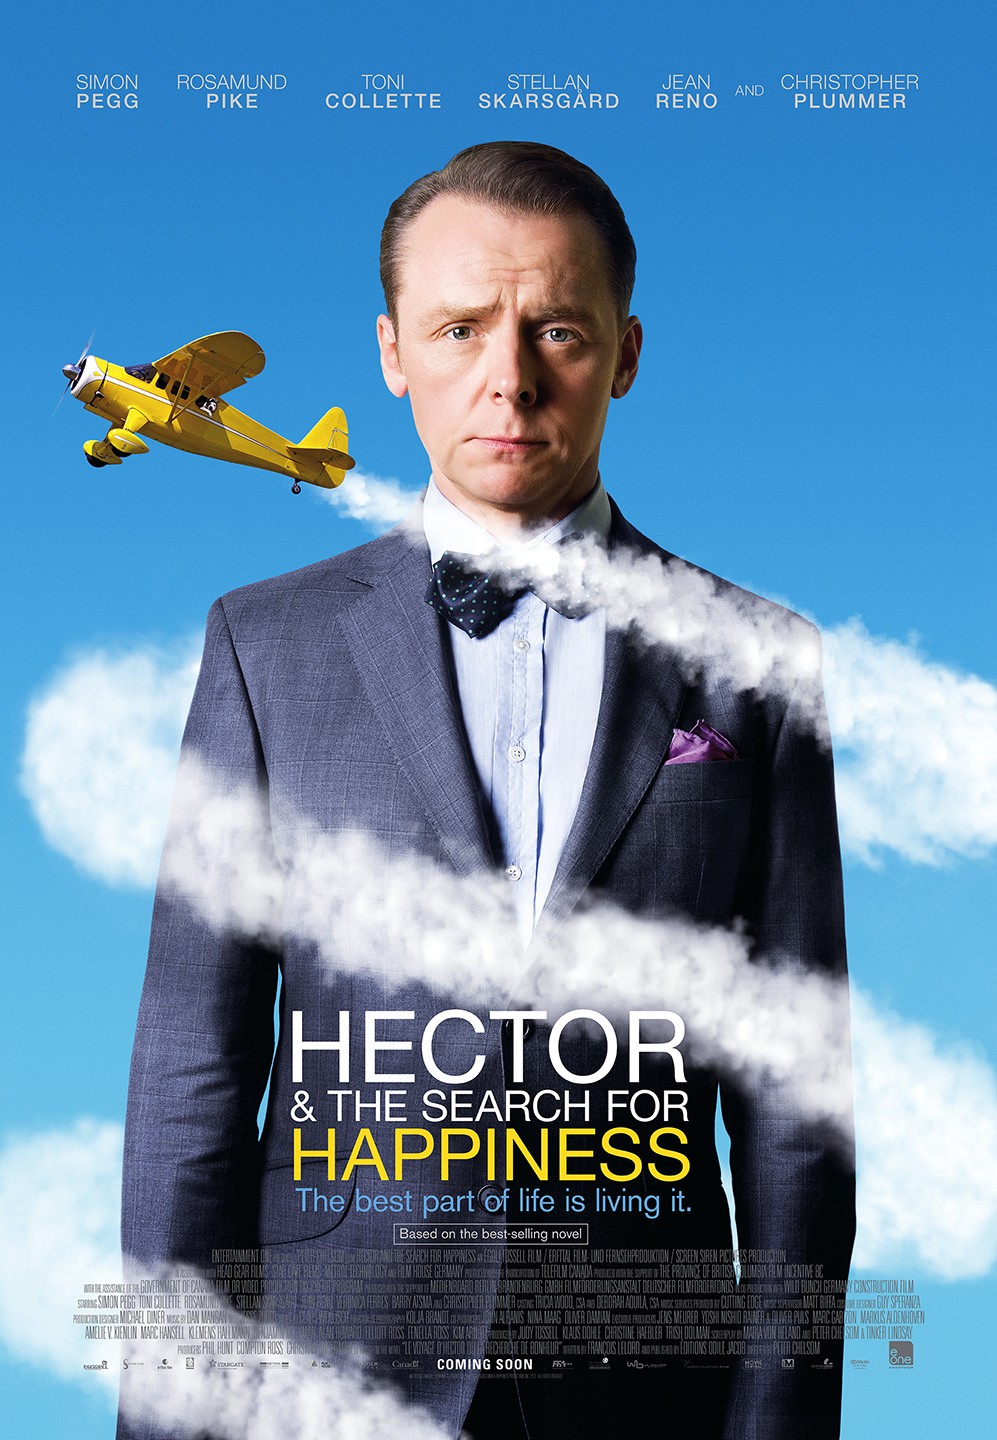 Hector the Search for Happiness and 2014